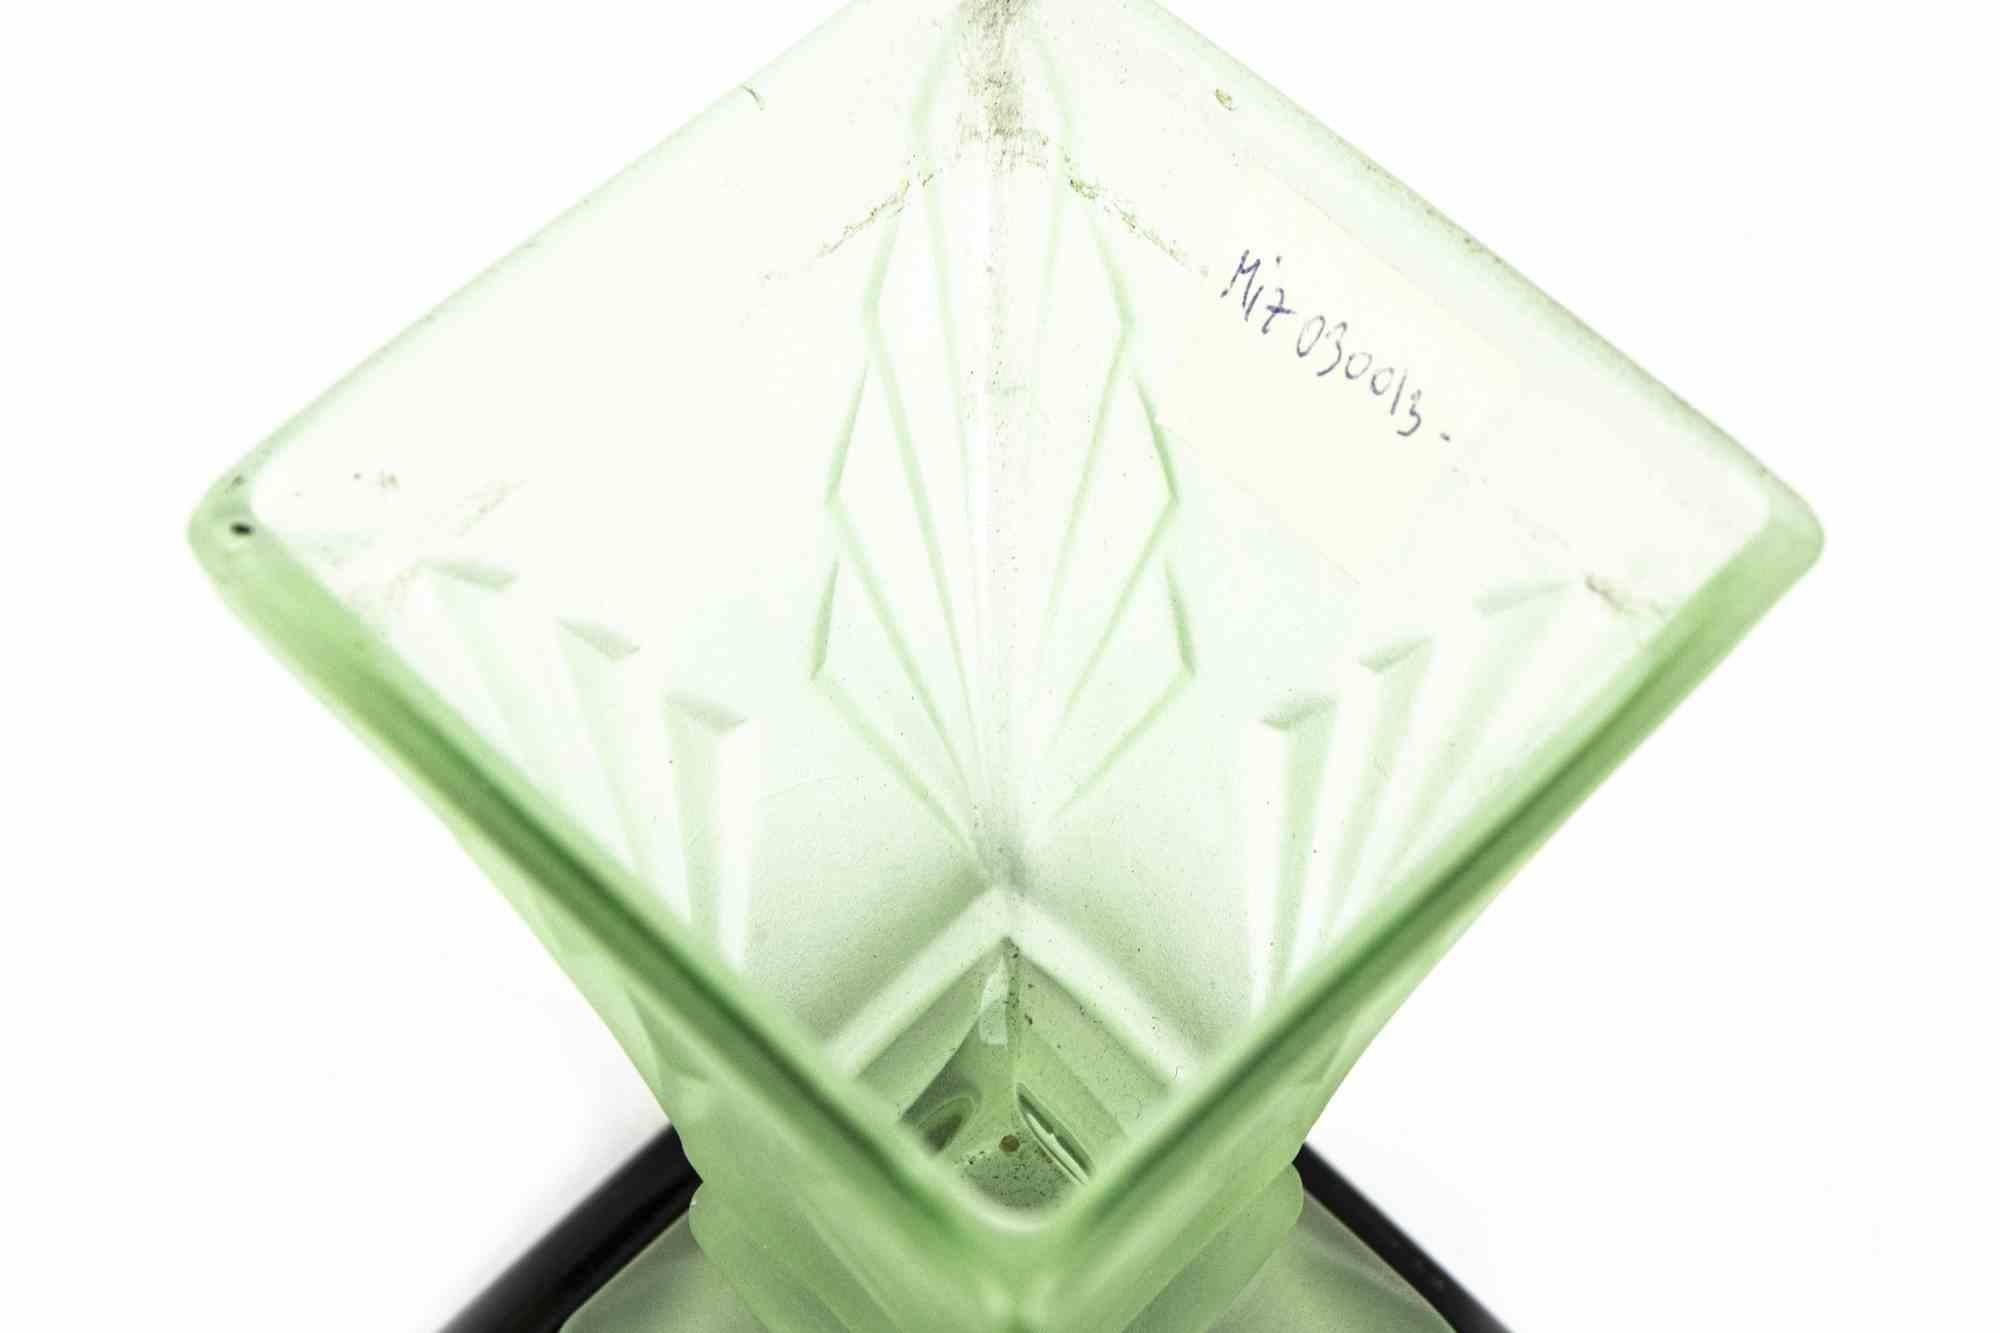 Satin Art glass centerpiece is an original decorative object realized in the mid-20th century.

Made in Italy.

The base has been in black ceramics. On the base there is a glass piece and, the centerpiece is realized in green satin art glass.